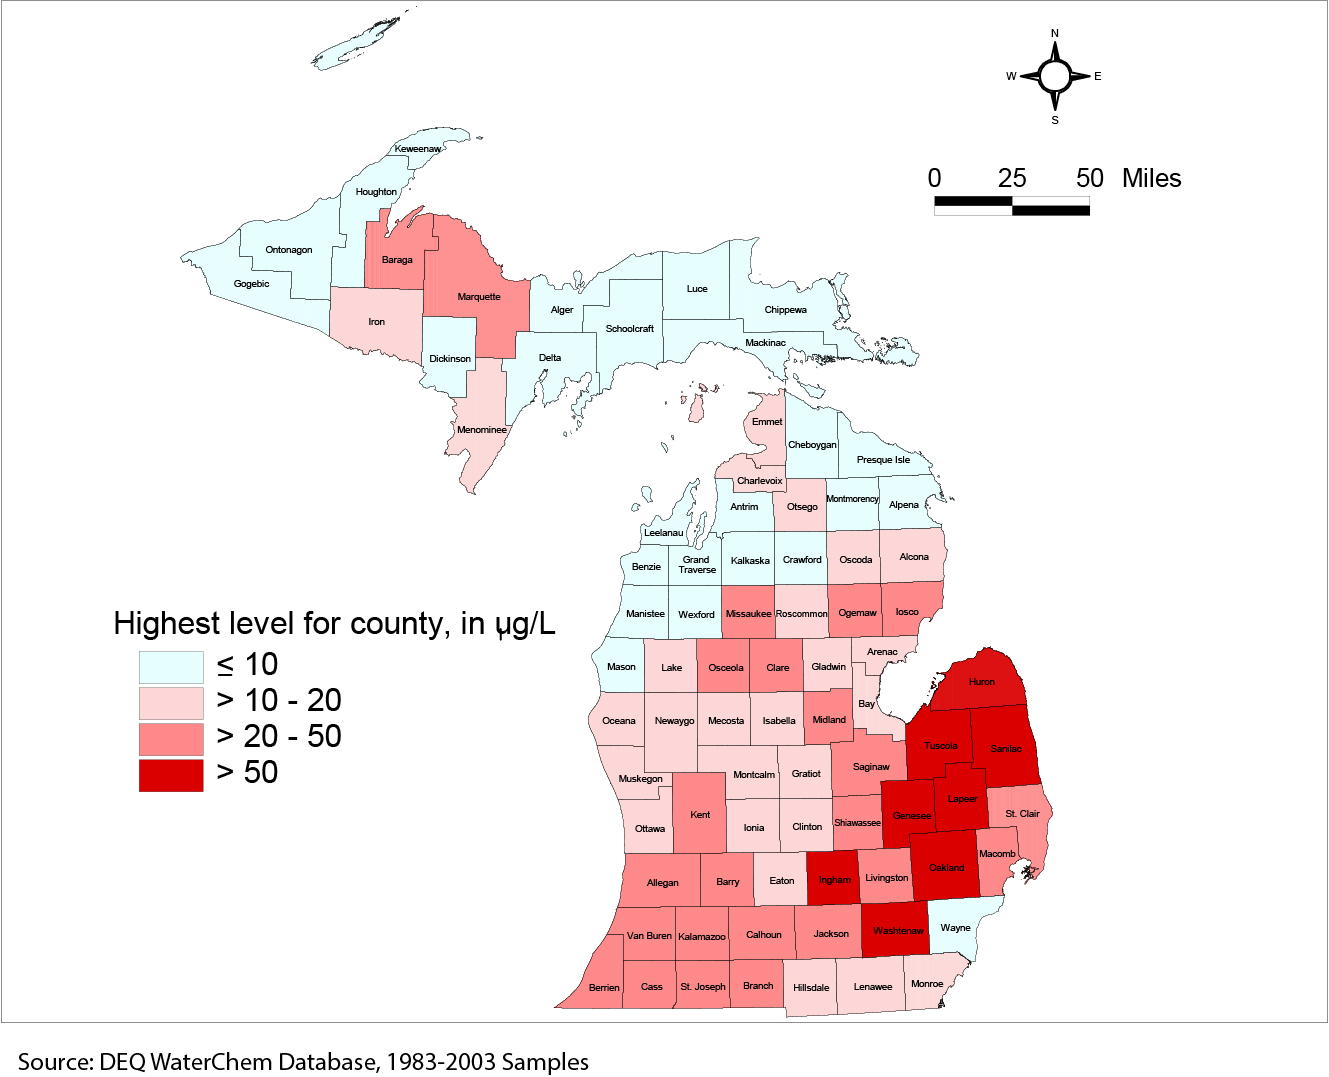 source: Michigan Department of Environment, Great Lakes, and Energy (MEGLE)